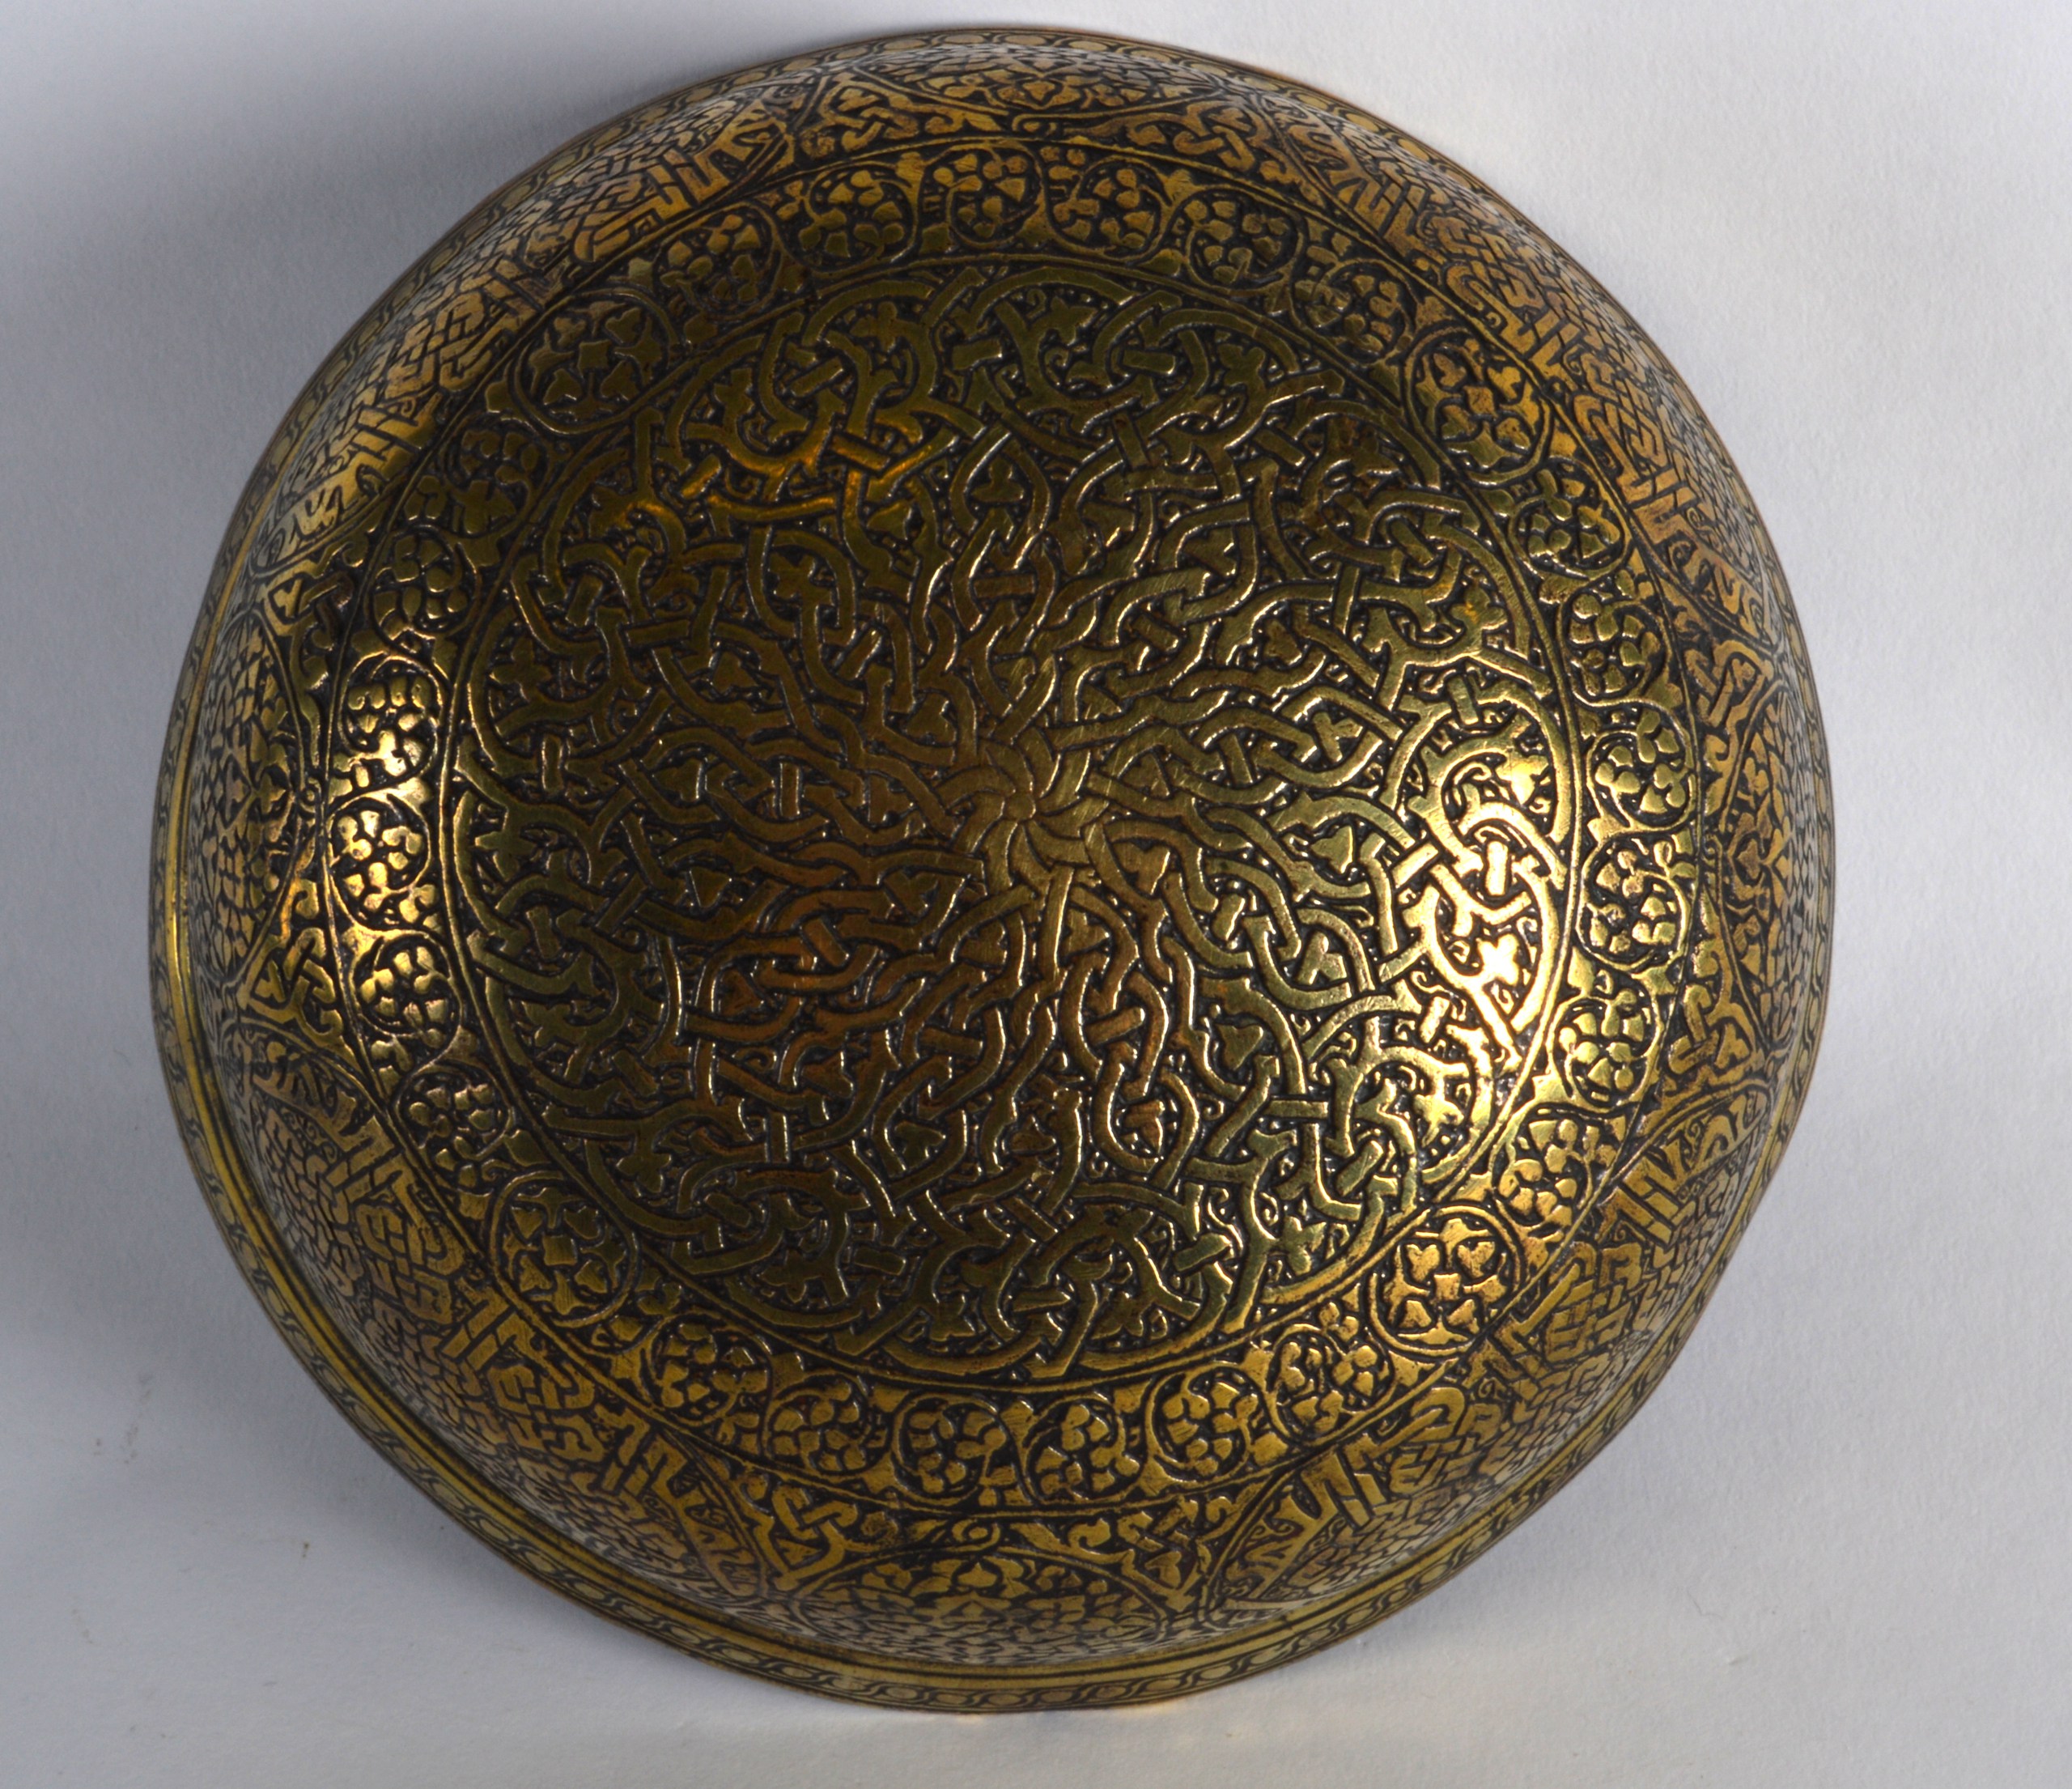 An Engraved Bronze Bowl, Venetian or Syrian, 15th/16th Century, Knotted Kufic Script. 6Ins - Image 3 of 3